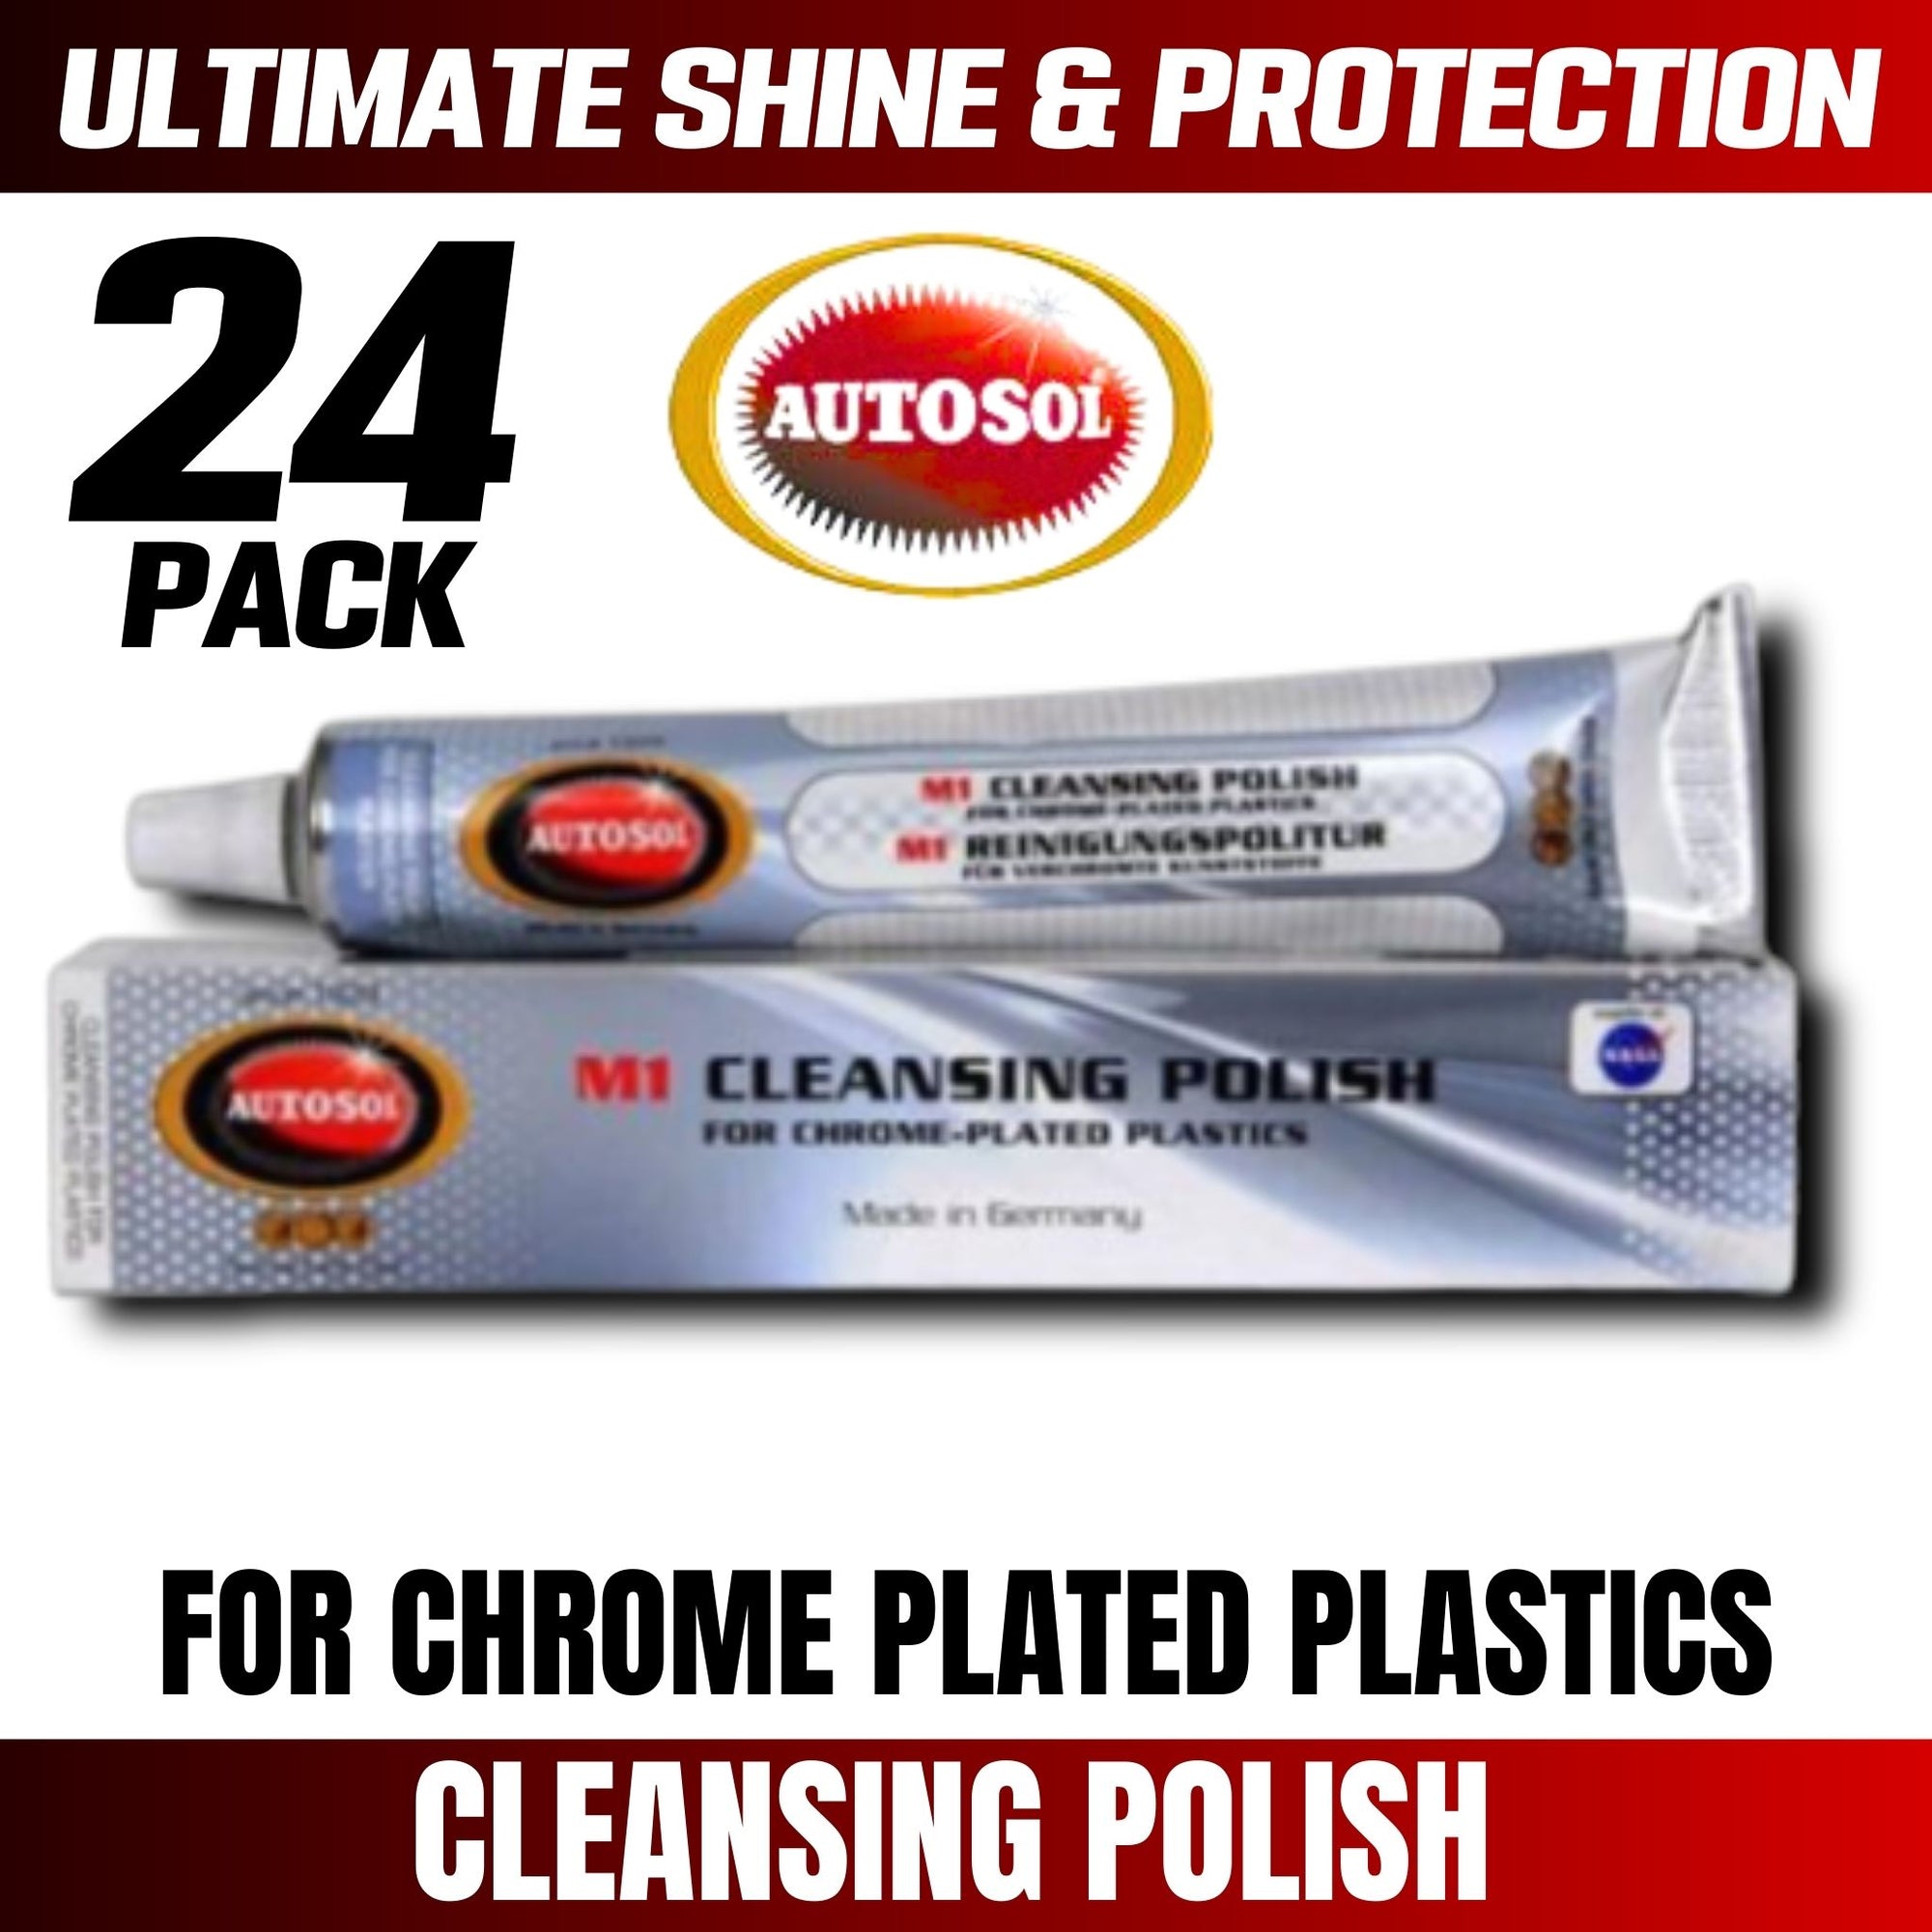 (24 PACK) Autosol M1 Chrome Plated Plastic Polish 75mL Tube - 1910 - South East Clearance Centre